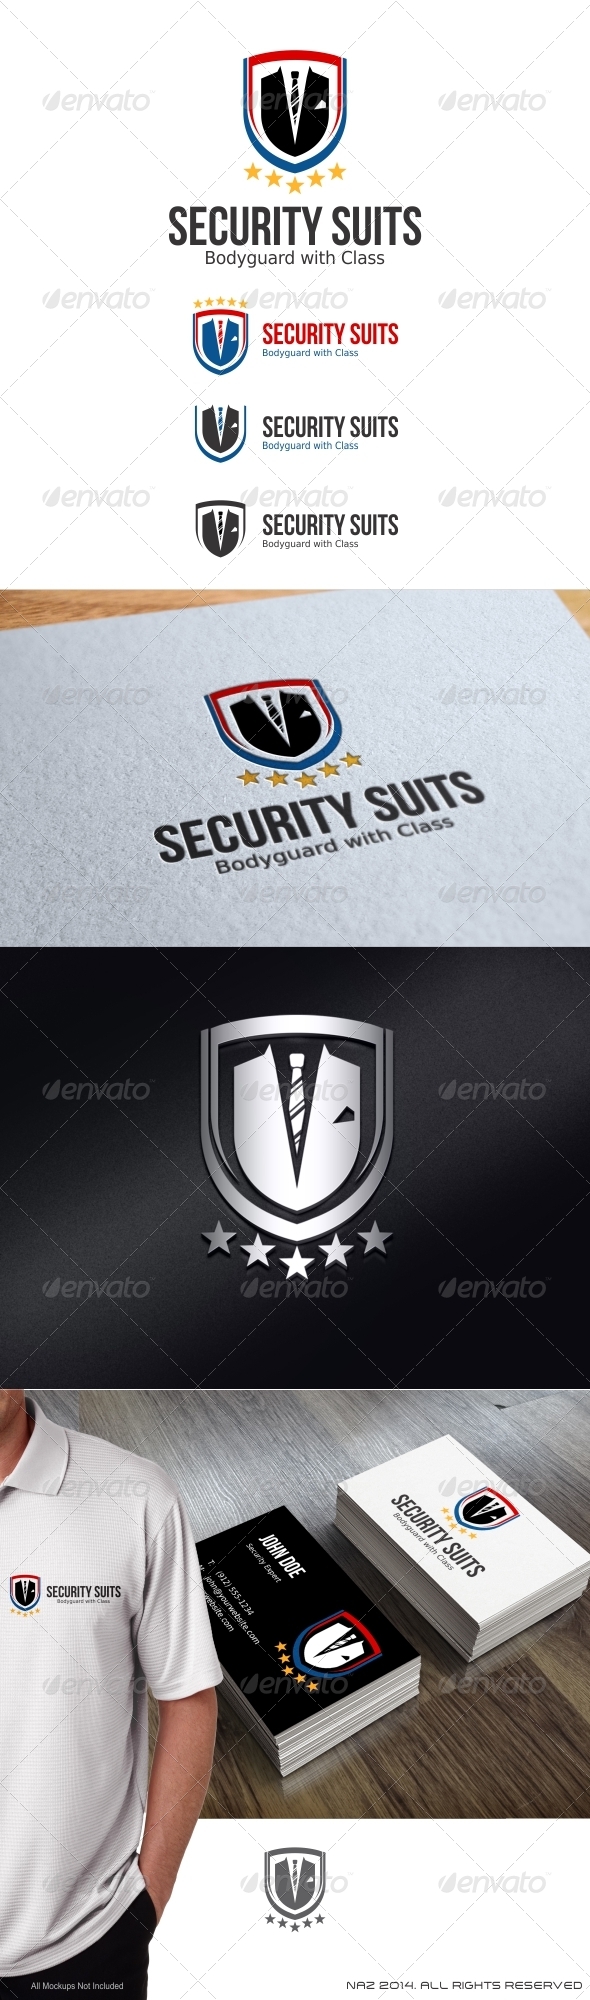 Security Suits Logo